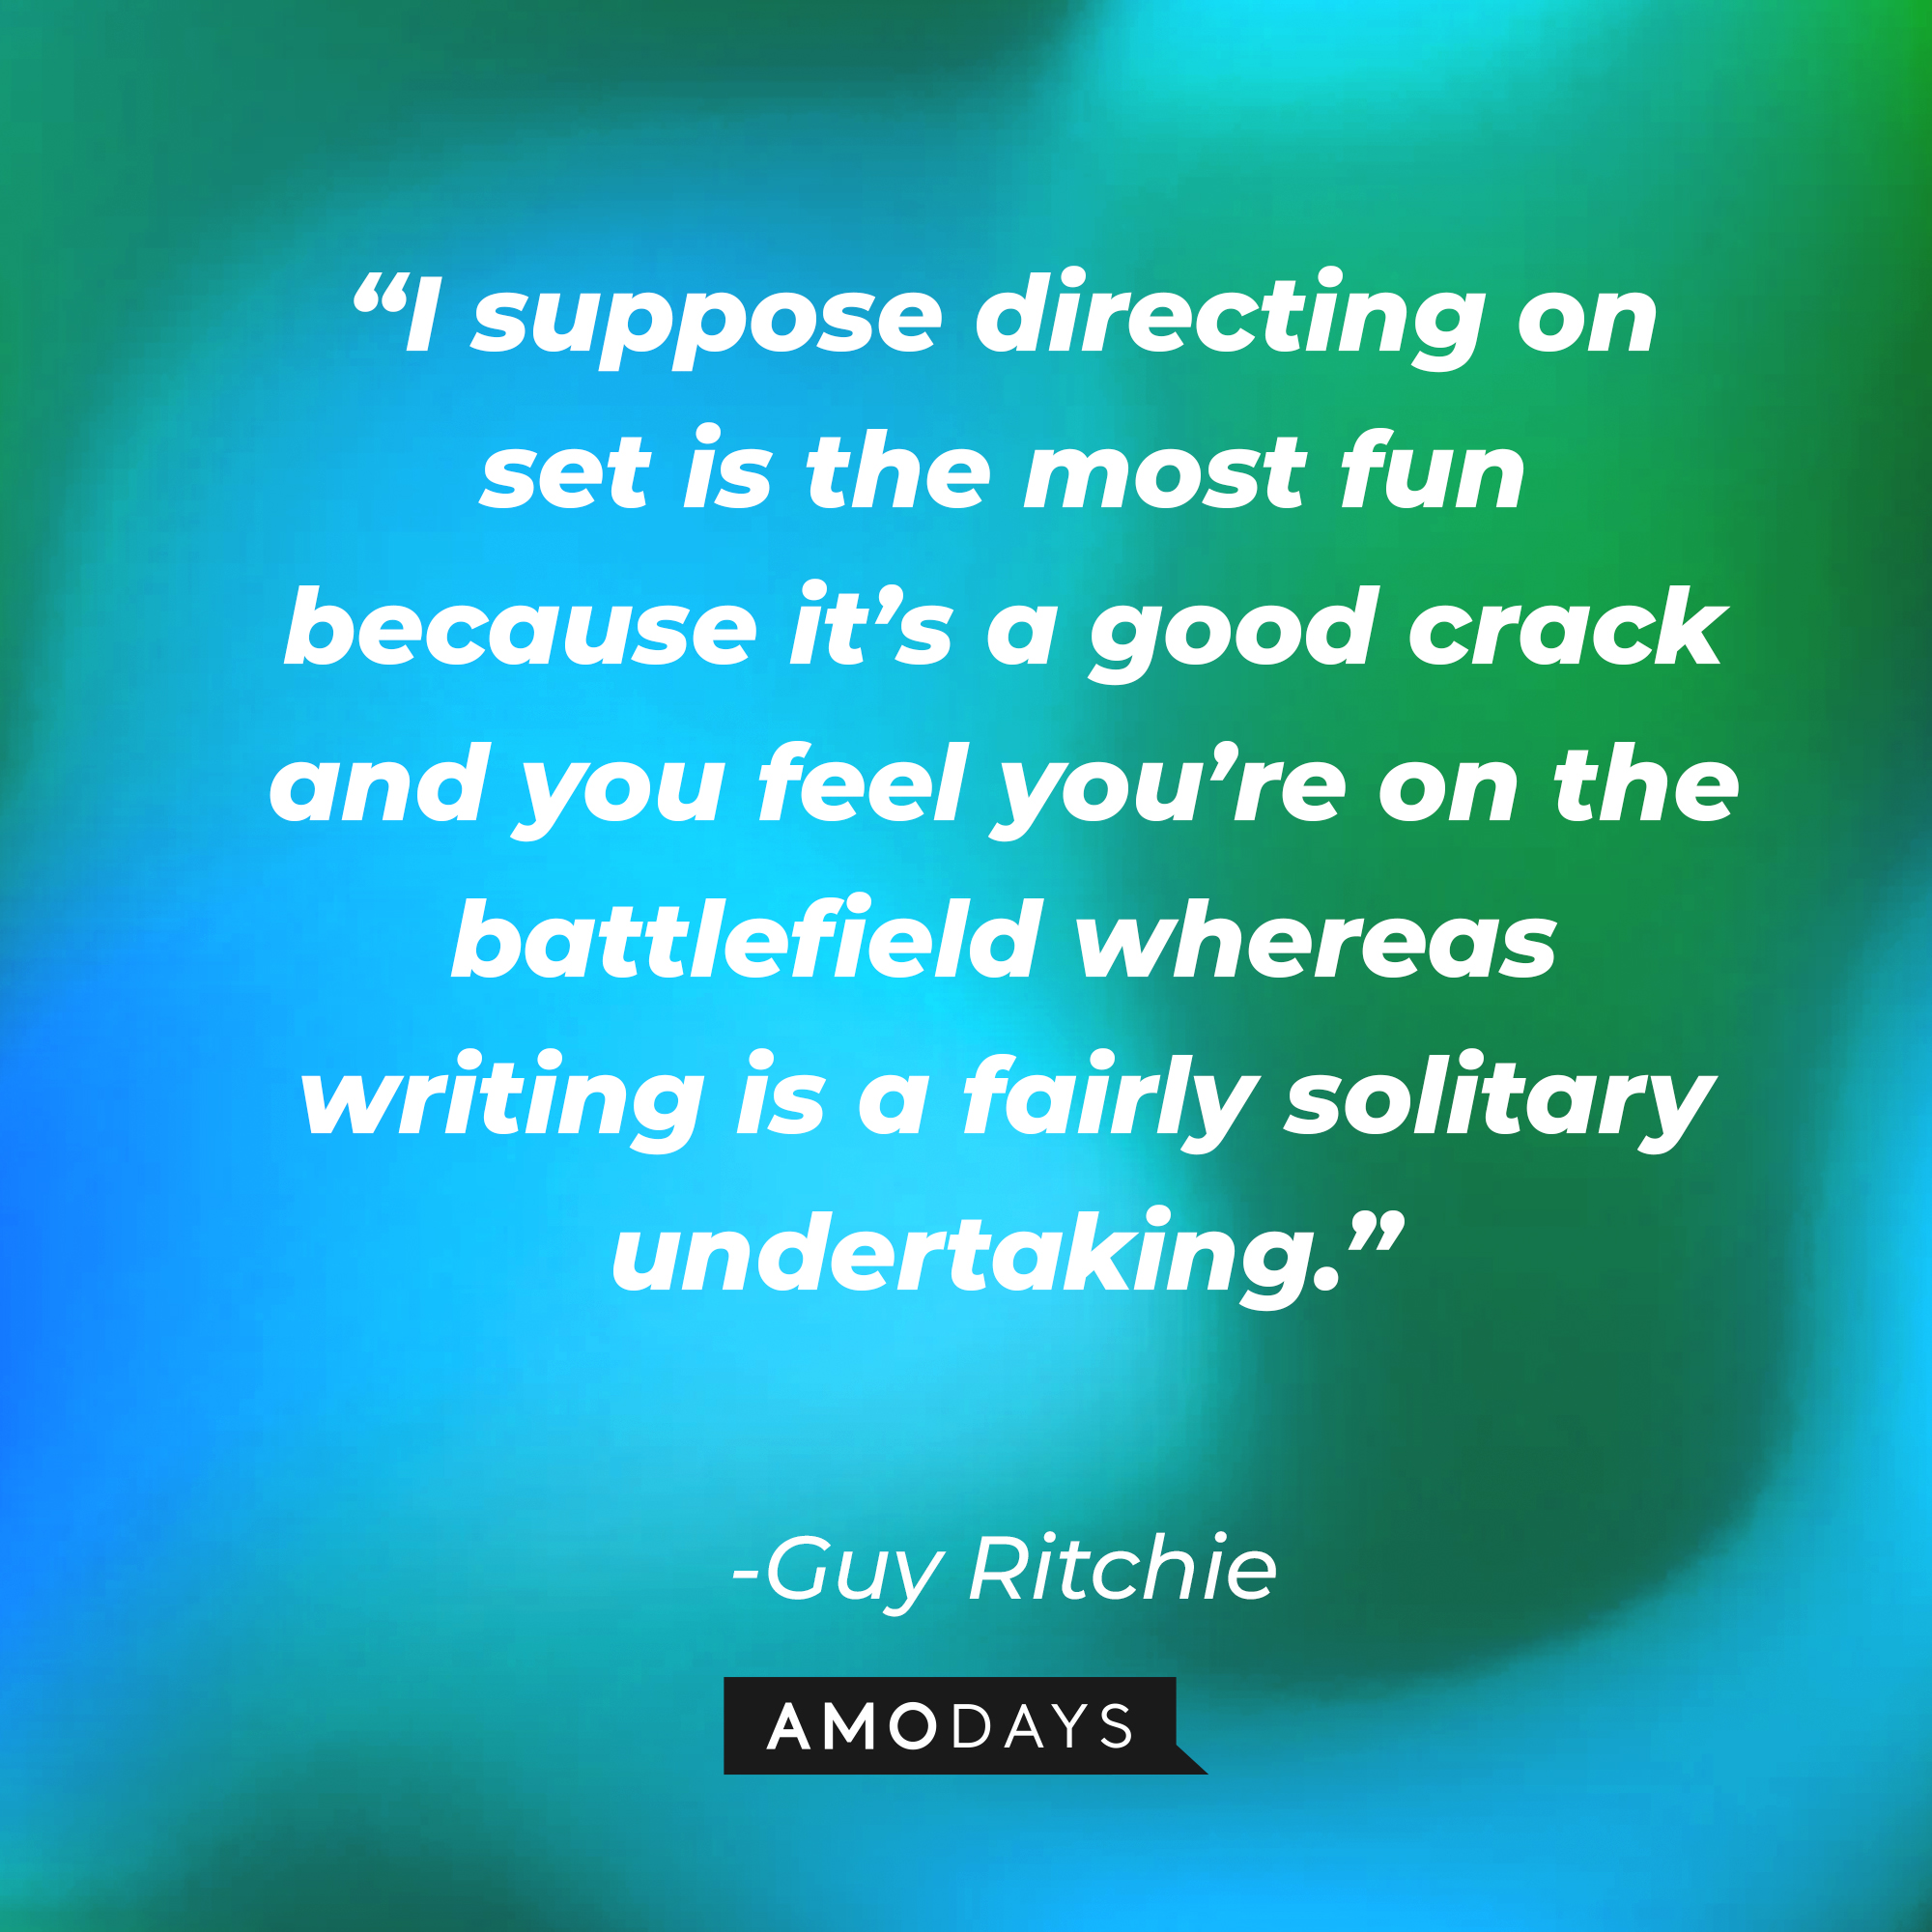 Guy Ritchie's quote, “I suppose directing on set is the most fun because it’s a good crack and you feel you’re on the battlefield whereas writing is a fairly solitary undertaking.”  | Source: AmoDays